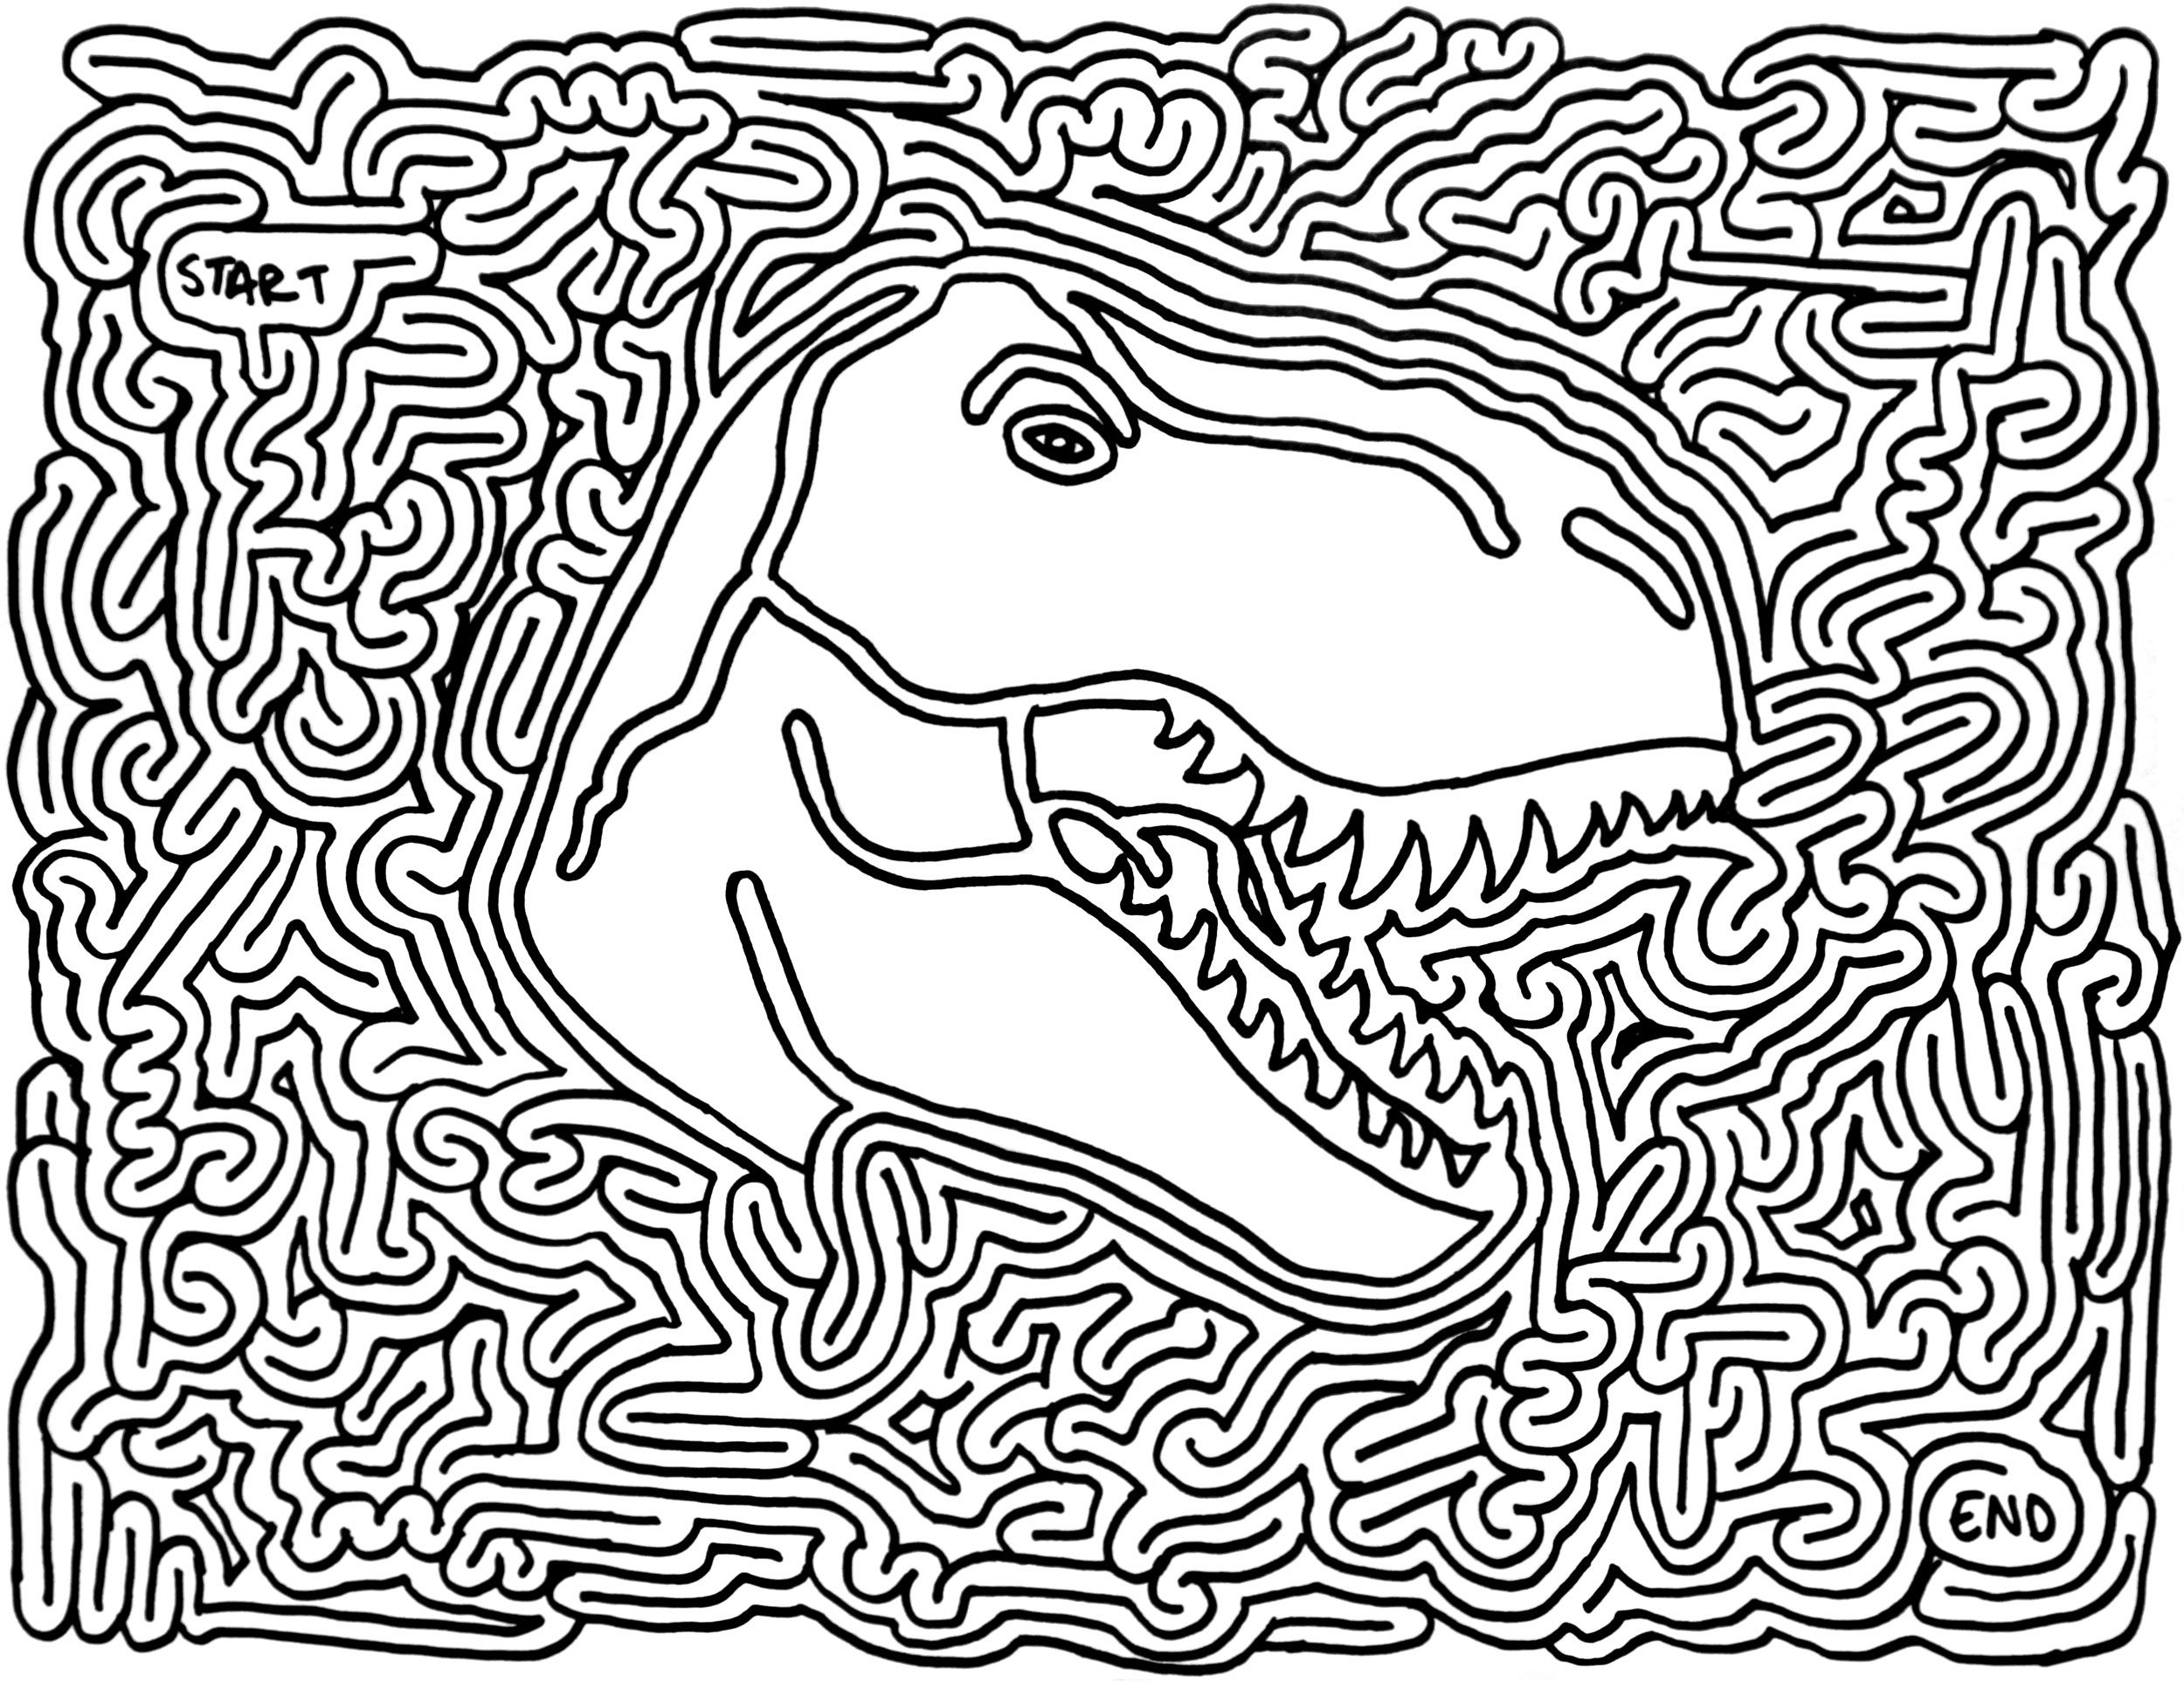 Printable Mazes - Best Coloring Pages For Kids - Printable Puzzle Mazes